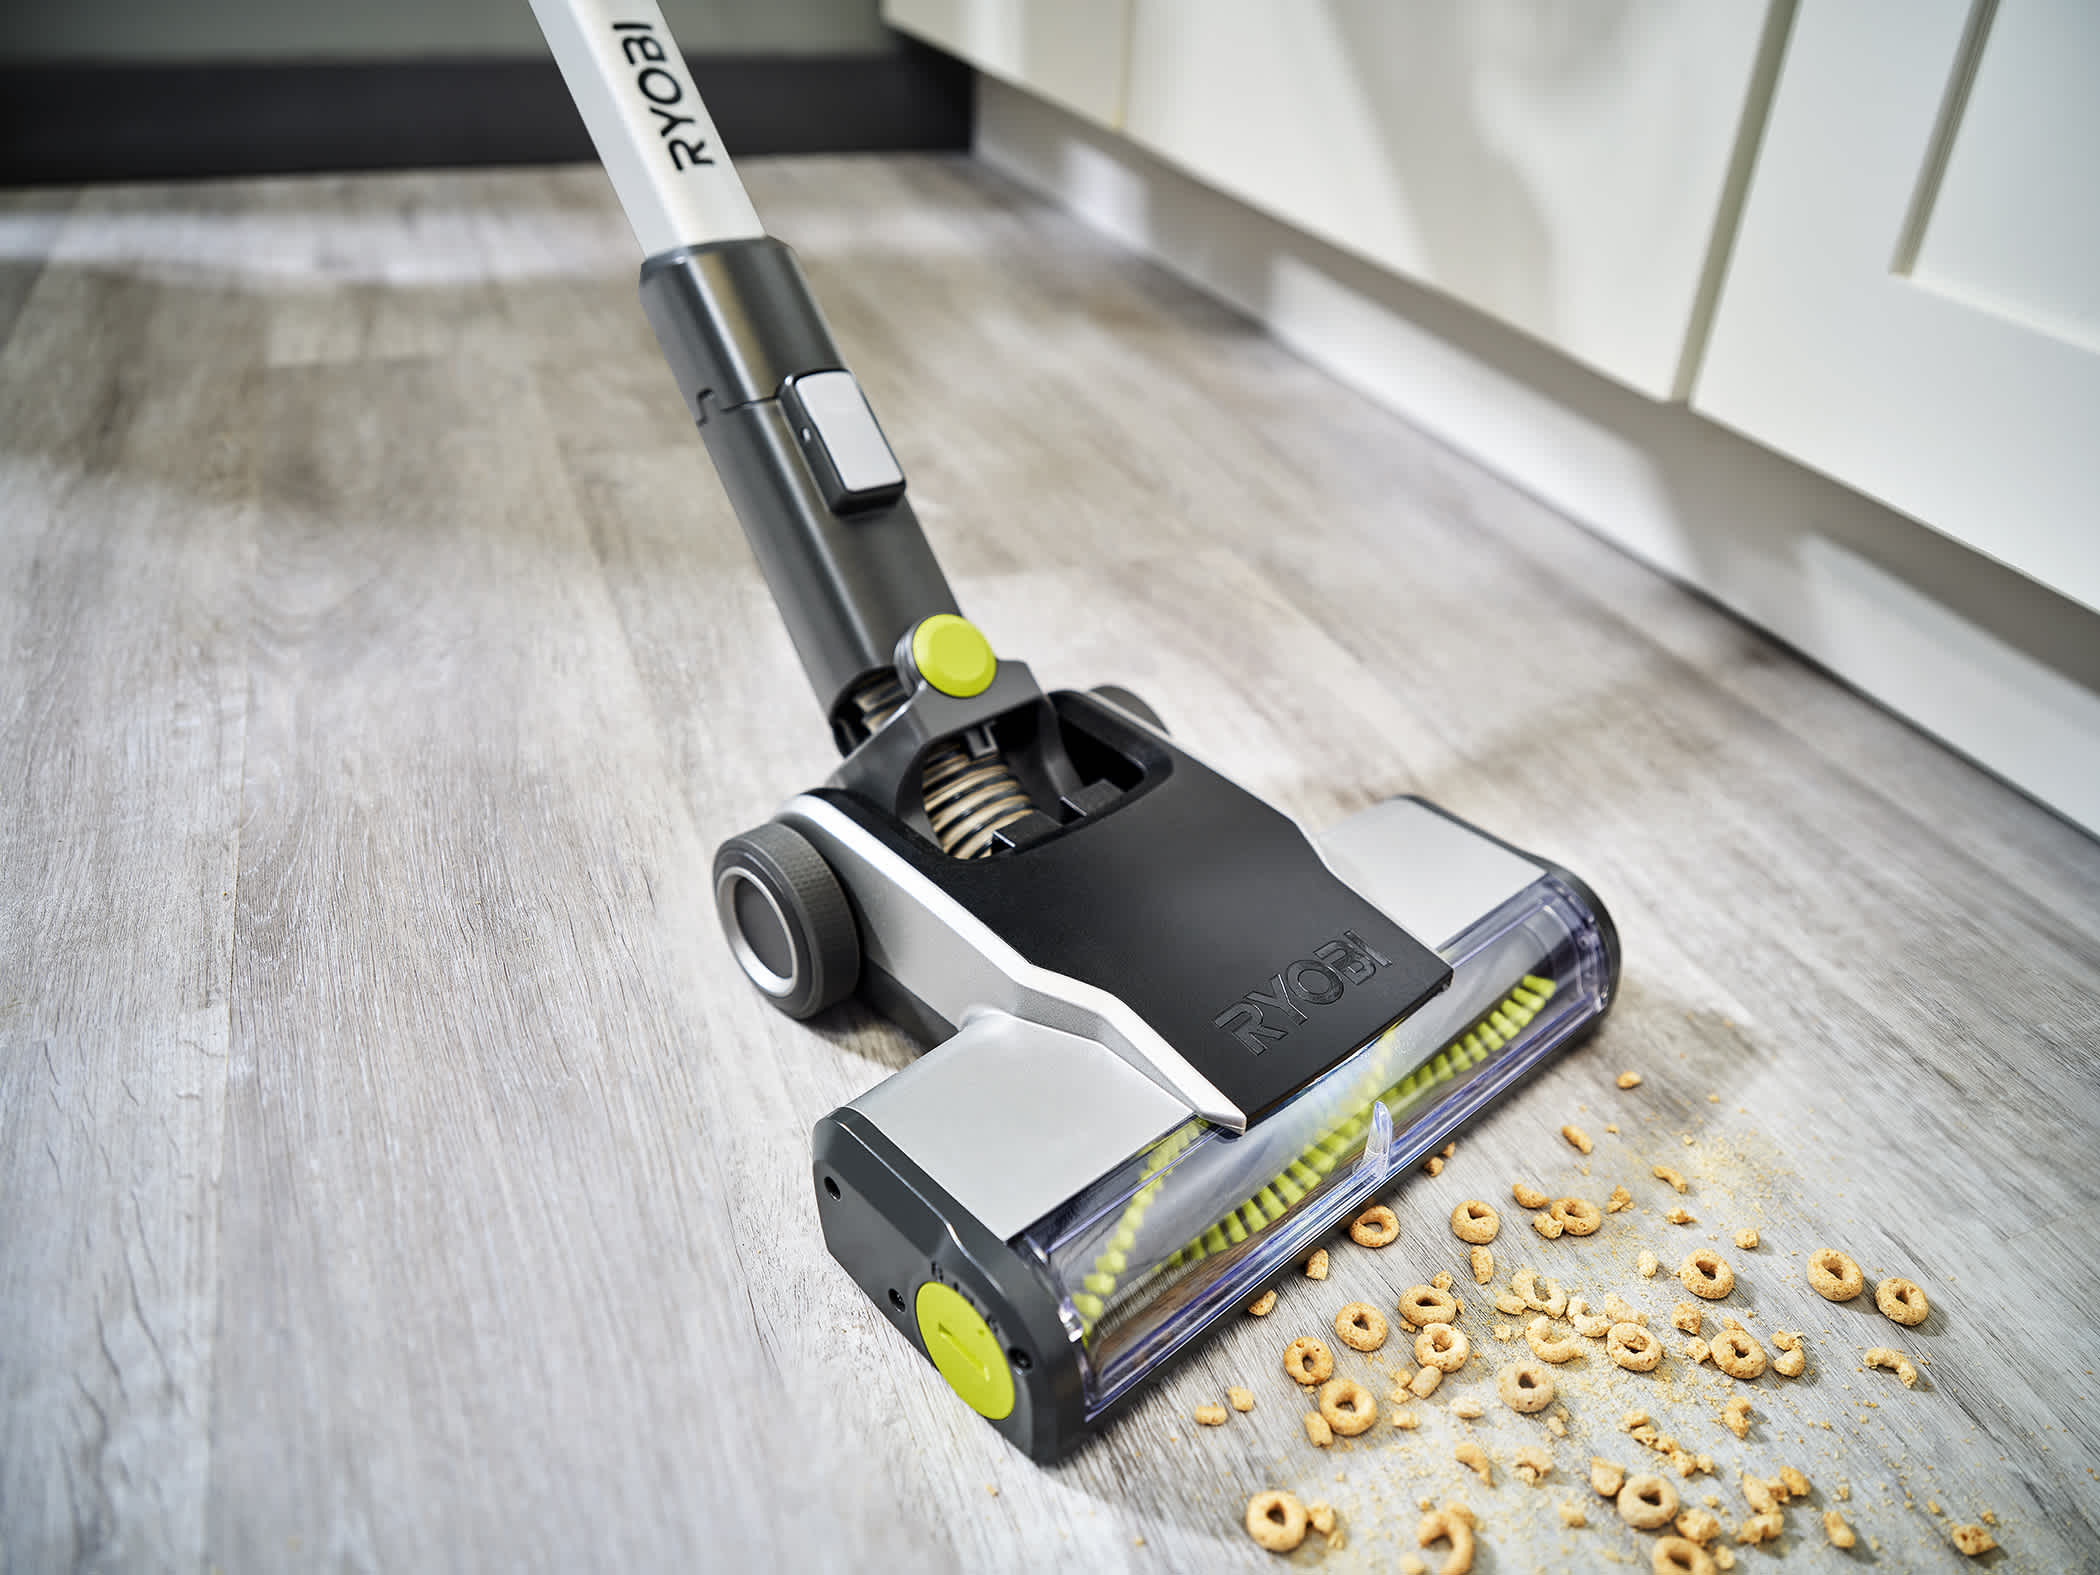 Product Features Image for 18V ONE+ CORDLESS STICK VAC.